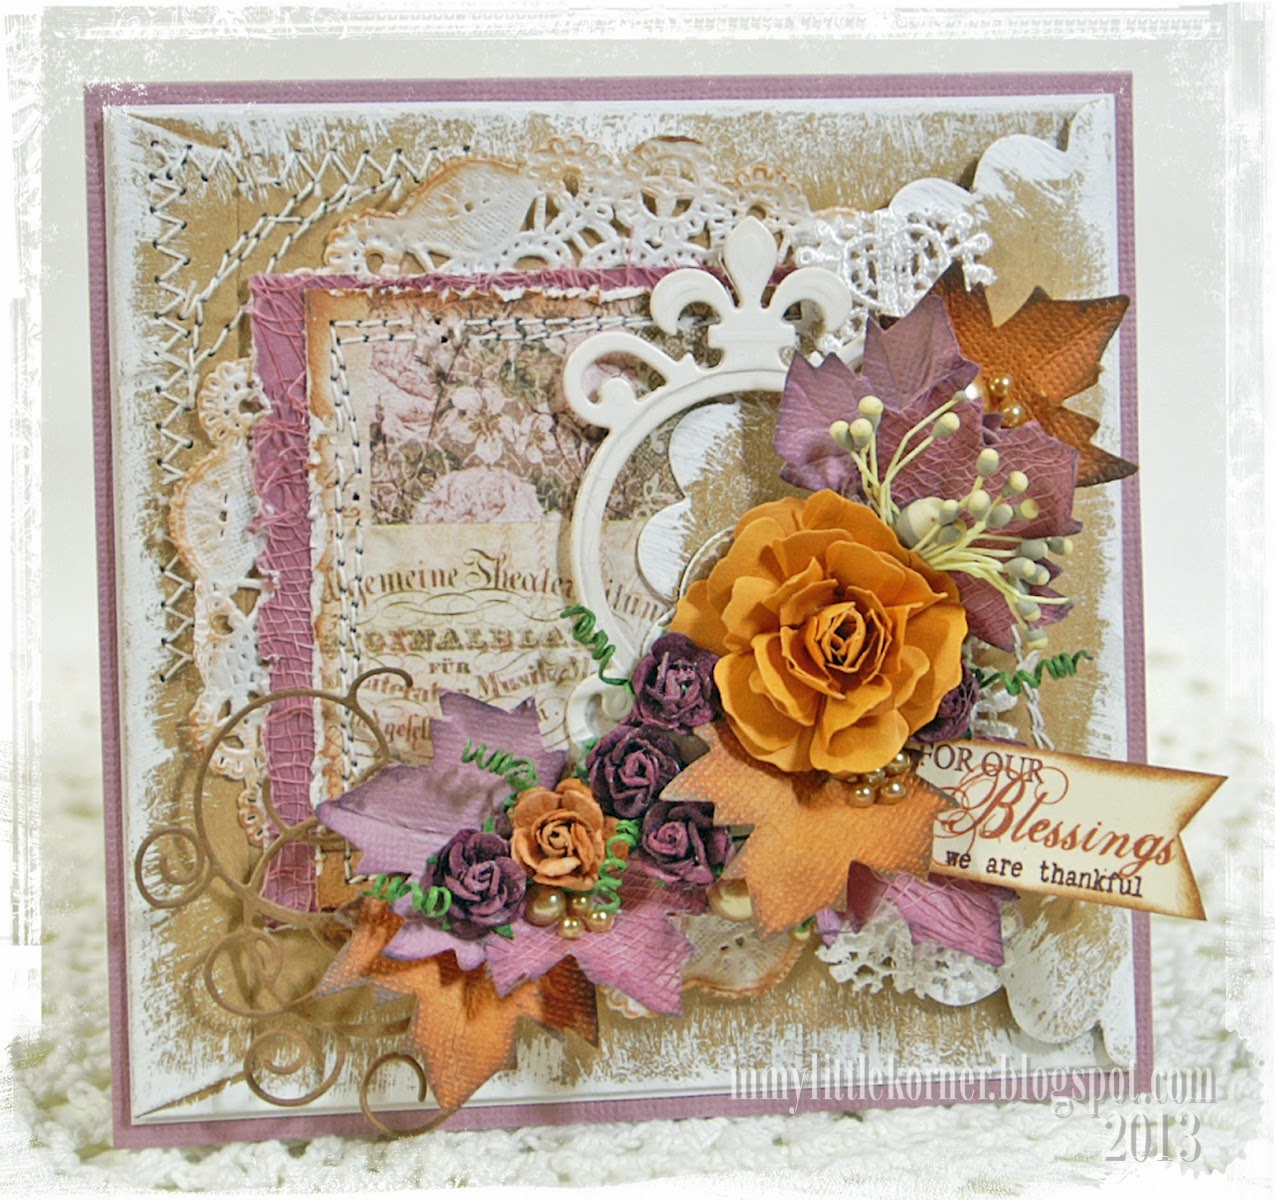 The largest rose is made with Spellbinders Rose Creations dies and